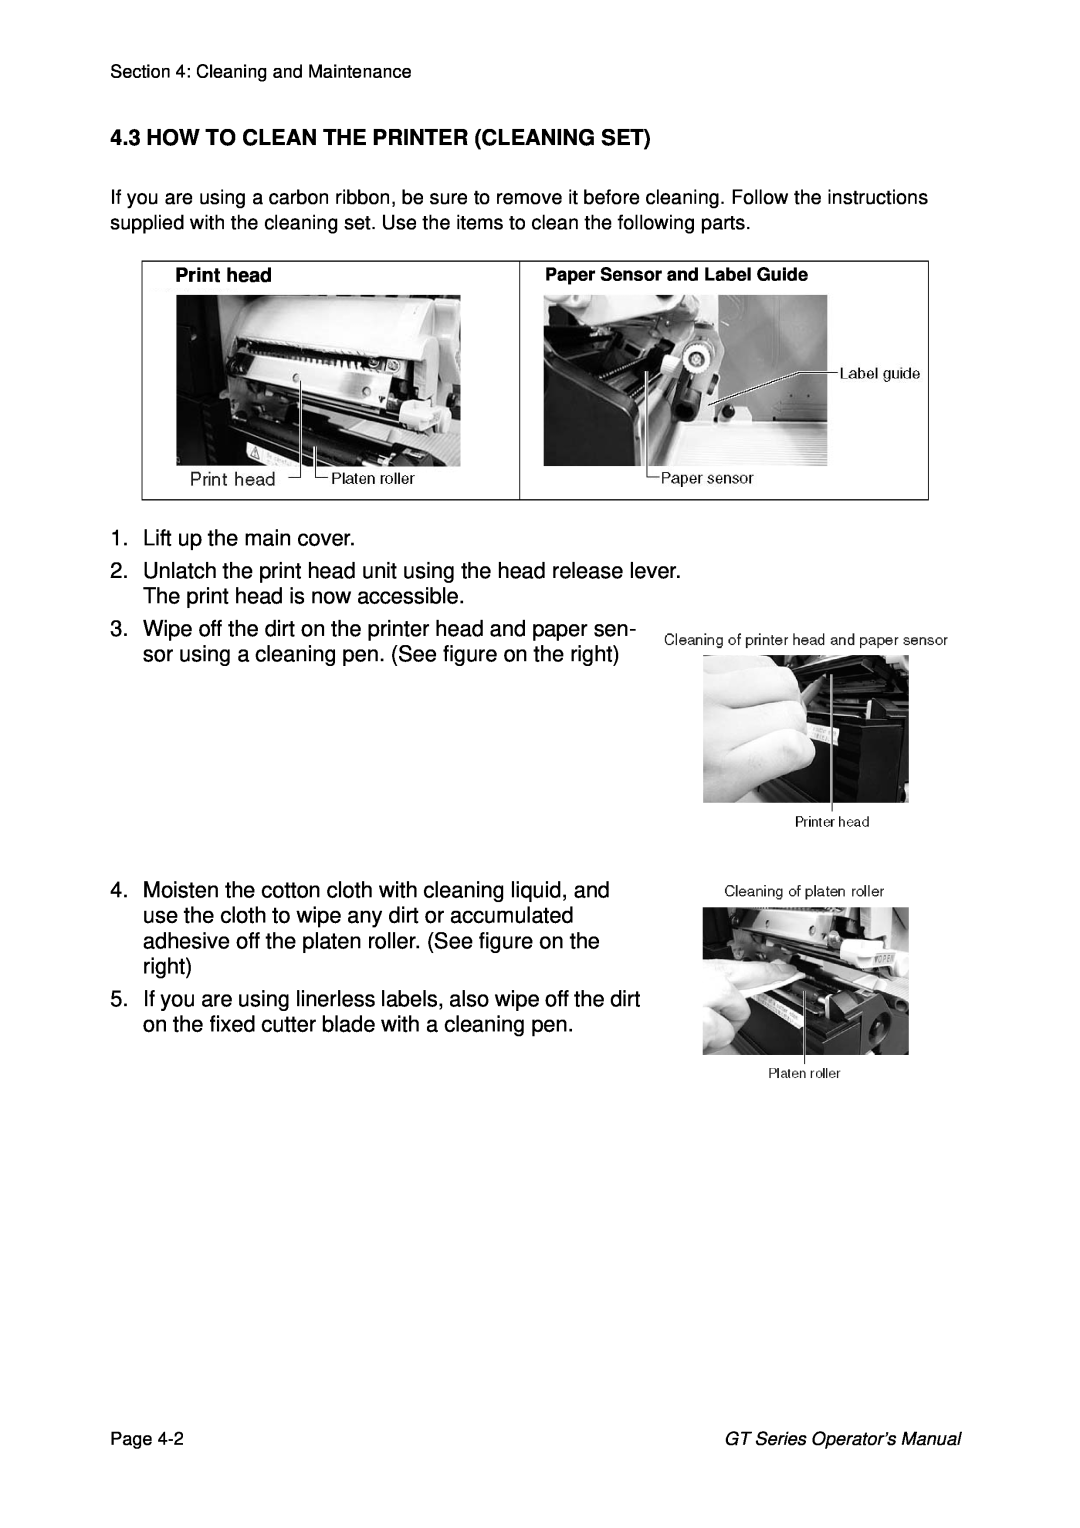 SATO GT424 manual How To Clean The Printer Cleaning Set 